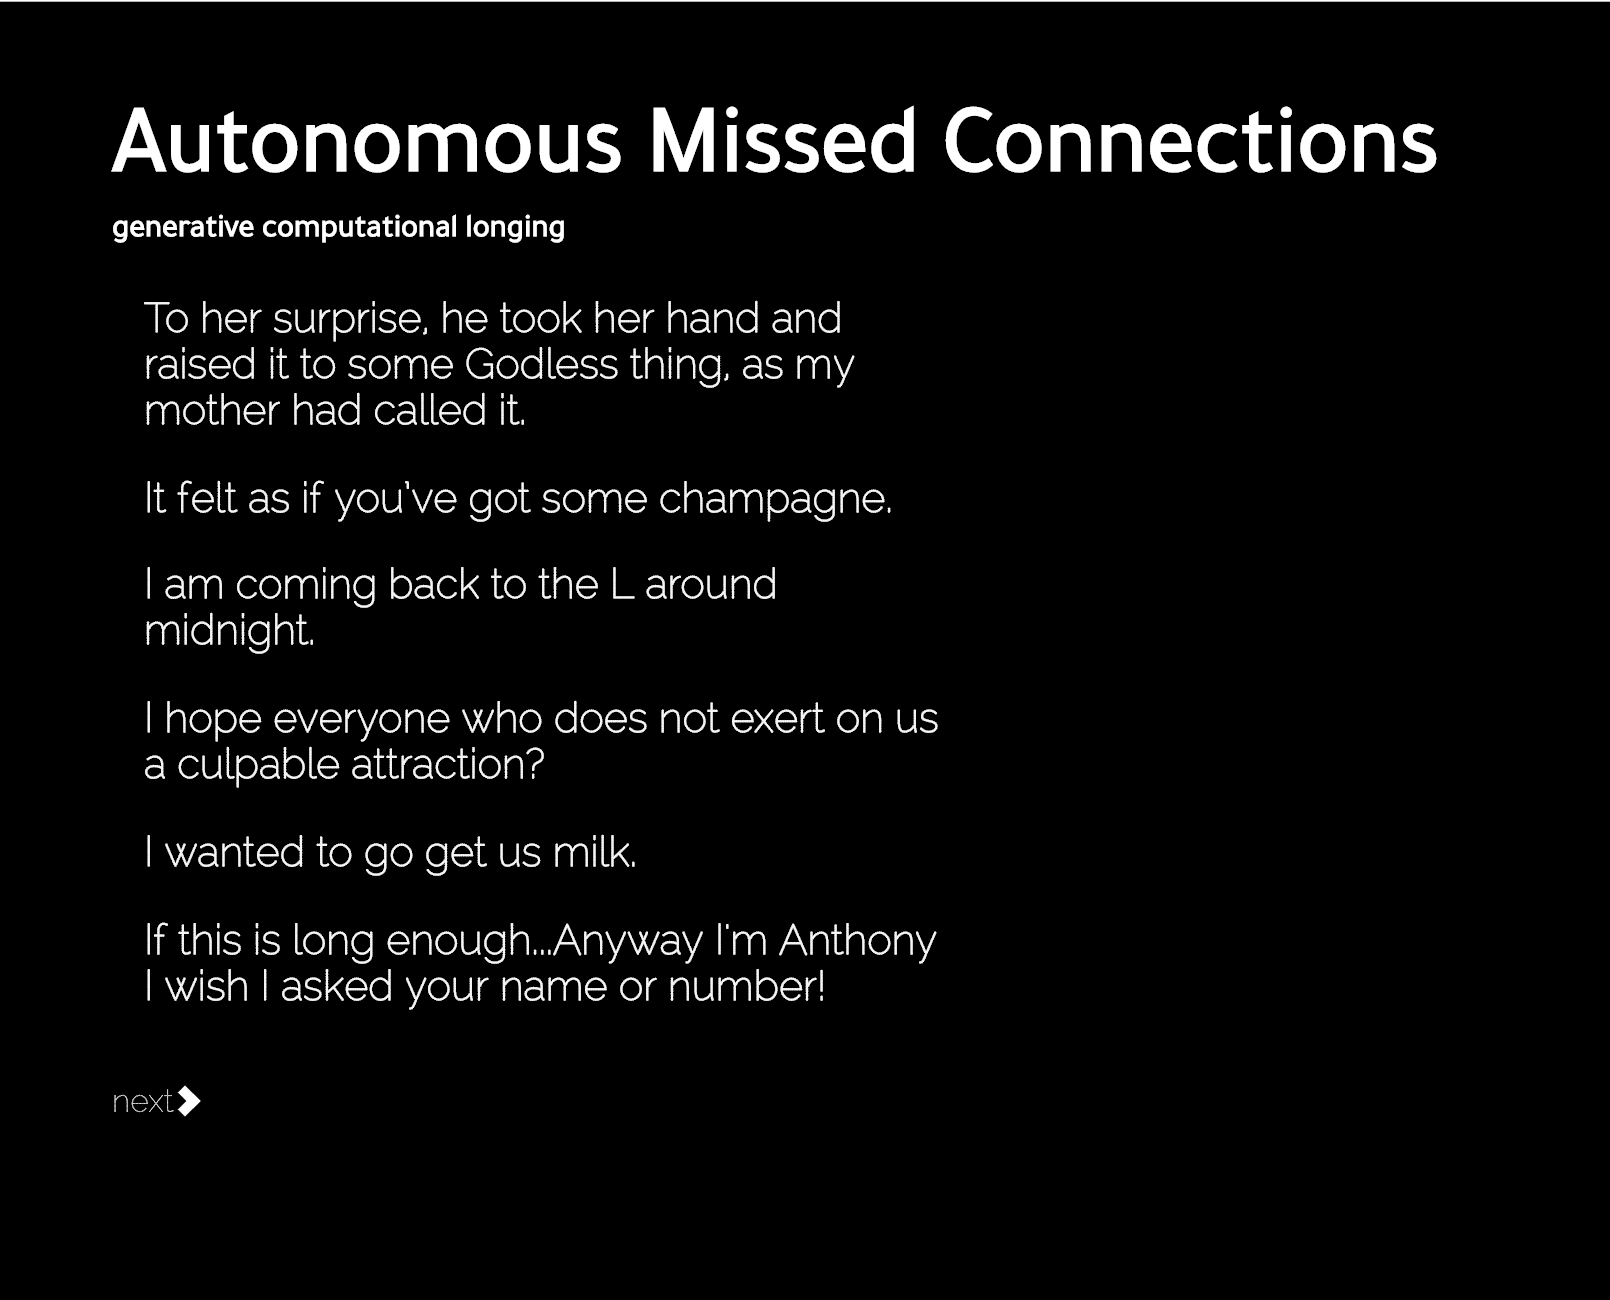 "A screenshot of Mimi's 'Autonomous Missed Connections'. The subtitle reads 'generative computer longing'. The generated stences read: To her surprise. he took her hand and raised it to some Godless thing, as my mother had called it. It felt as if you’ve got some champagne. I am coming back to the L around midnight. I hope everyone who does not exert on us a culpable attraction? I wanted to go get us milk. If this is long enough…Anyway I’m Anthony I wish I asked your name or number!"